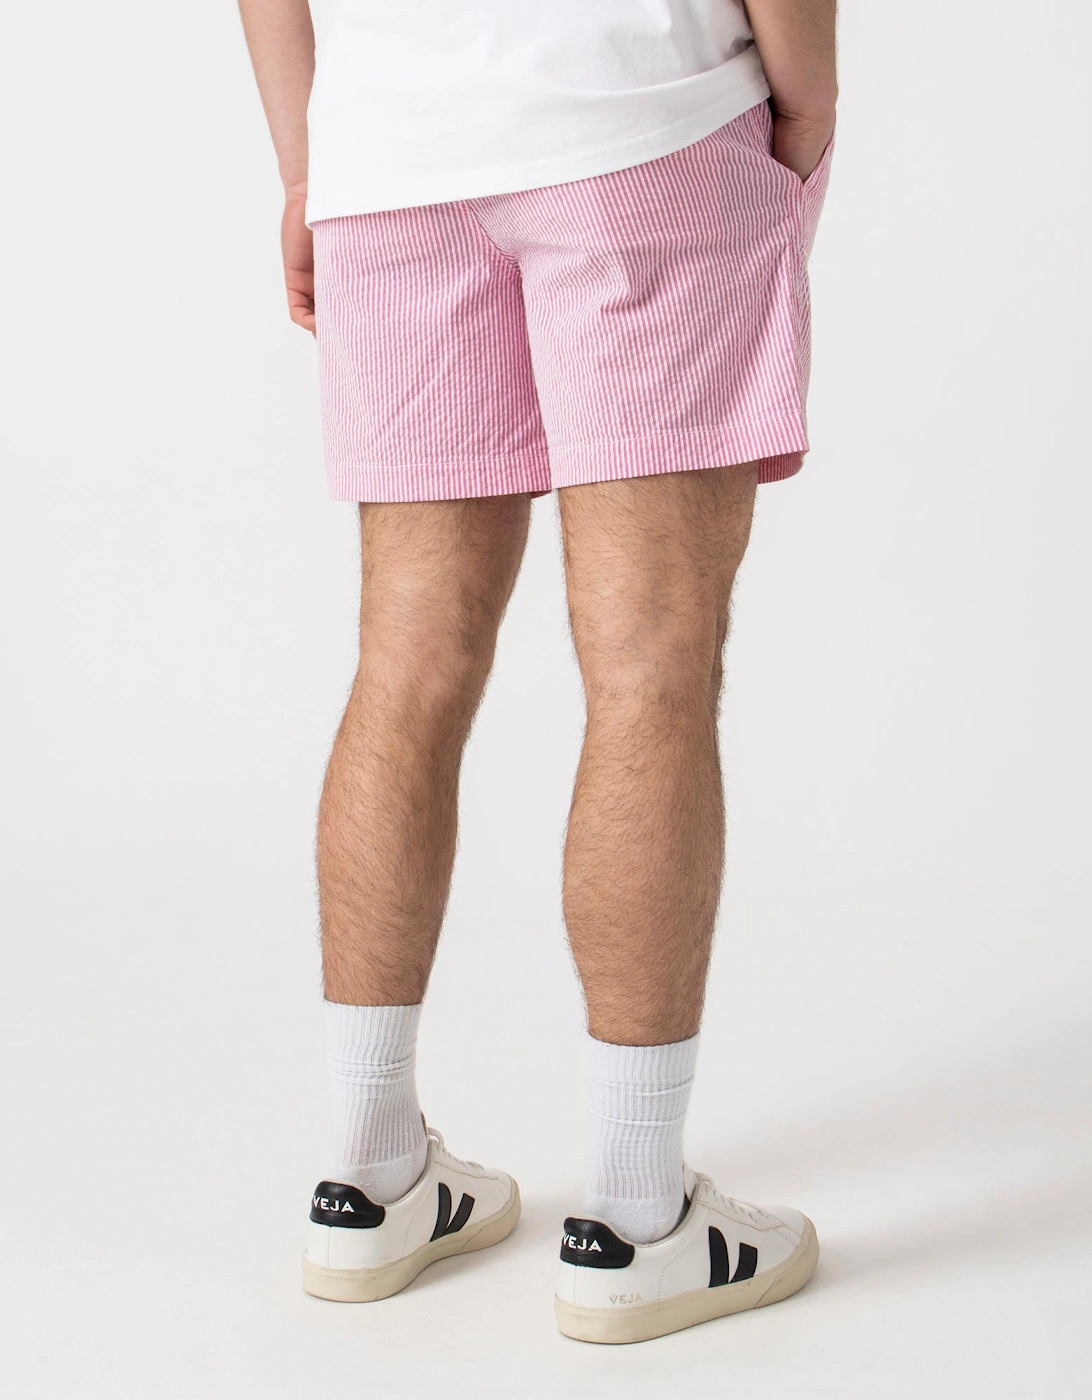 Classic Fit Twill Flat Front Shorts